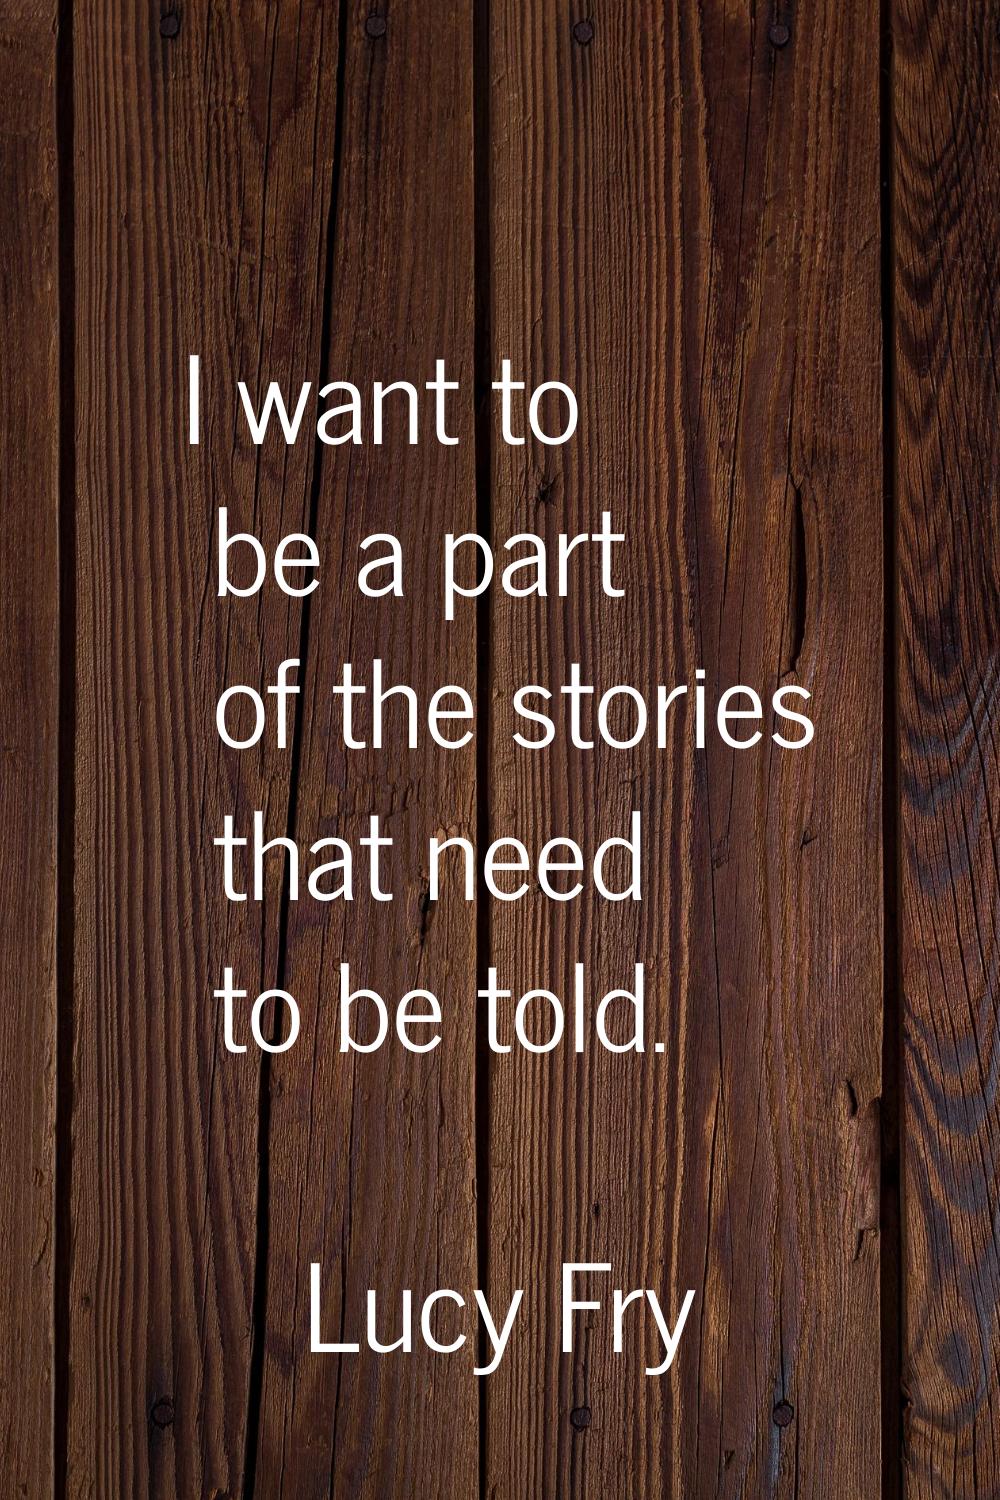 I want to be a part of the stories that need to be told.